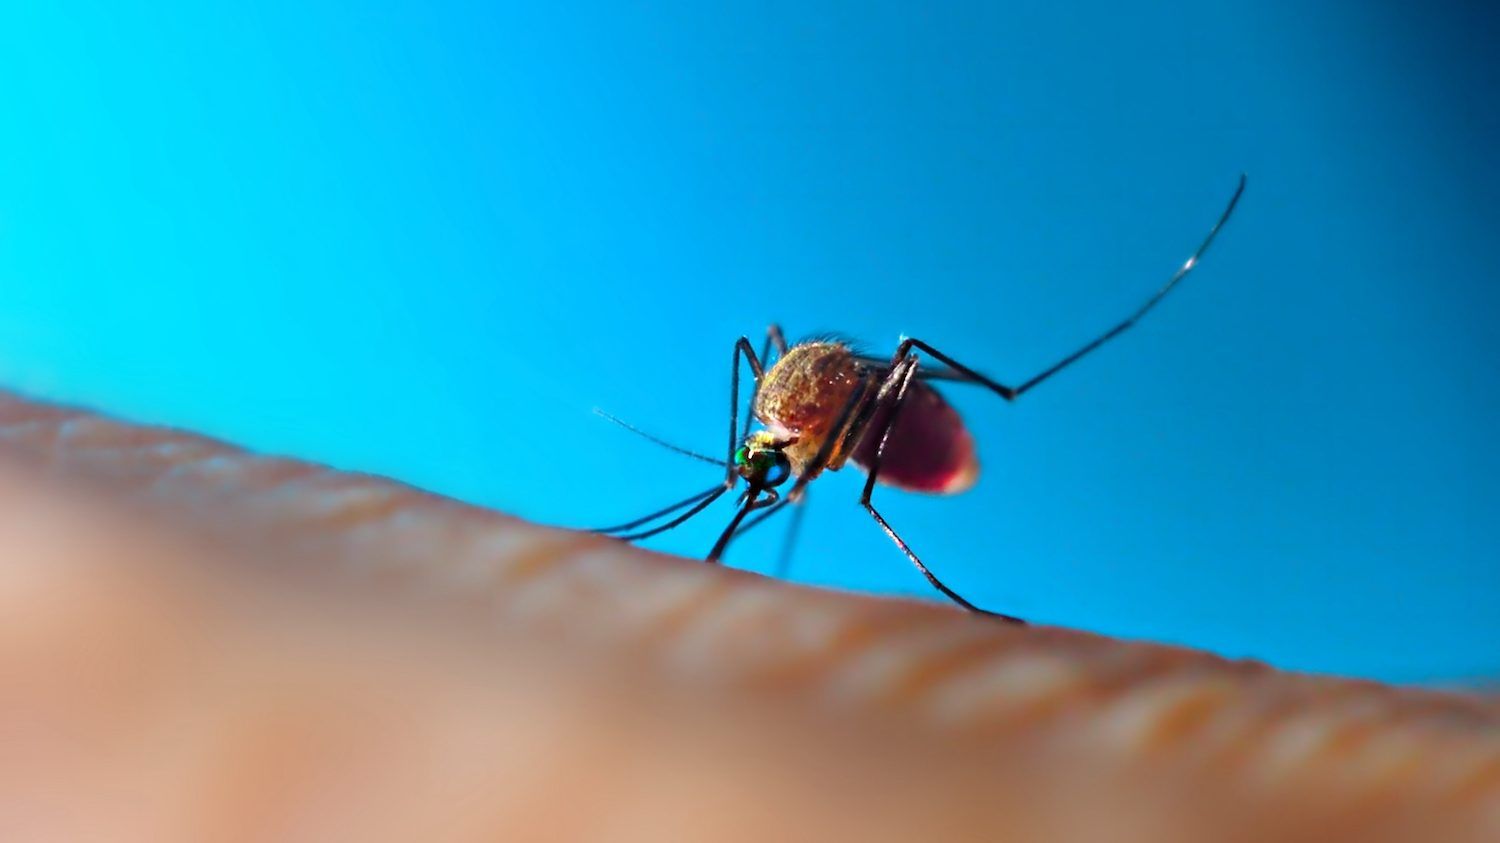 Malaria is a disease specific to tropical areas. But there are real-world benefits to a malaria vaccine for people living in non-tropical climates, too. GETTY